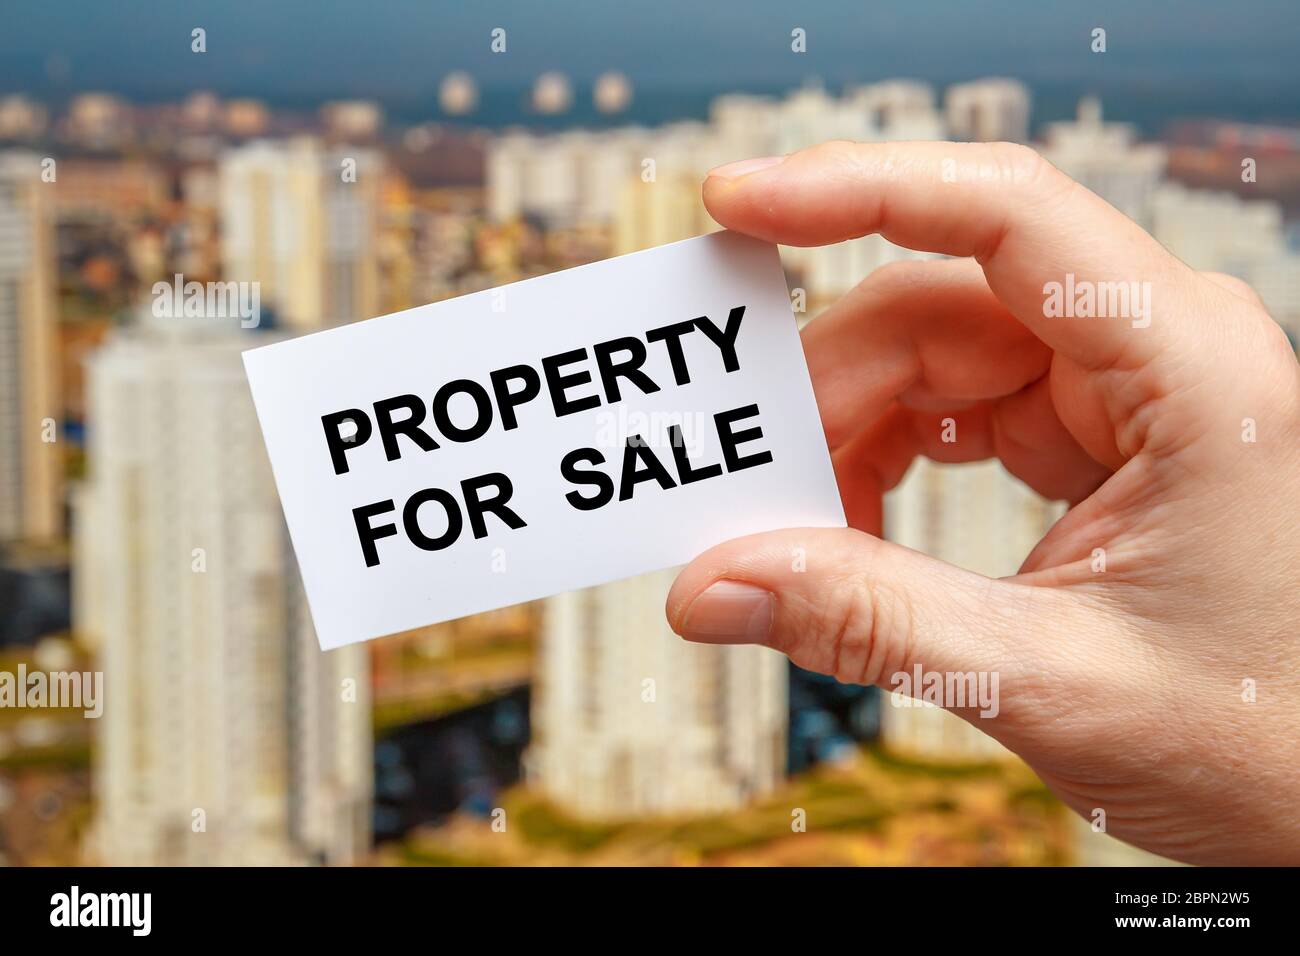 Property for sale - the inscription on the card that a person holds against the background of the city. Property value concept Stock Photo